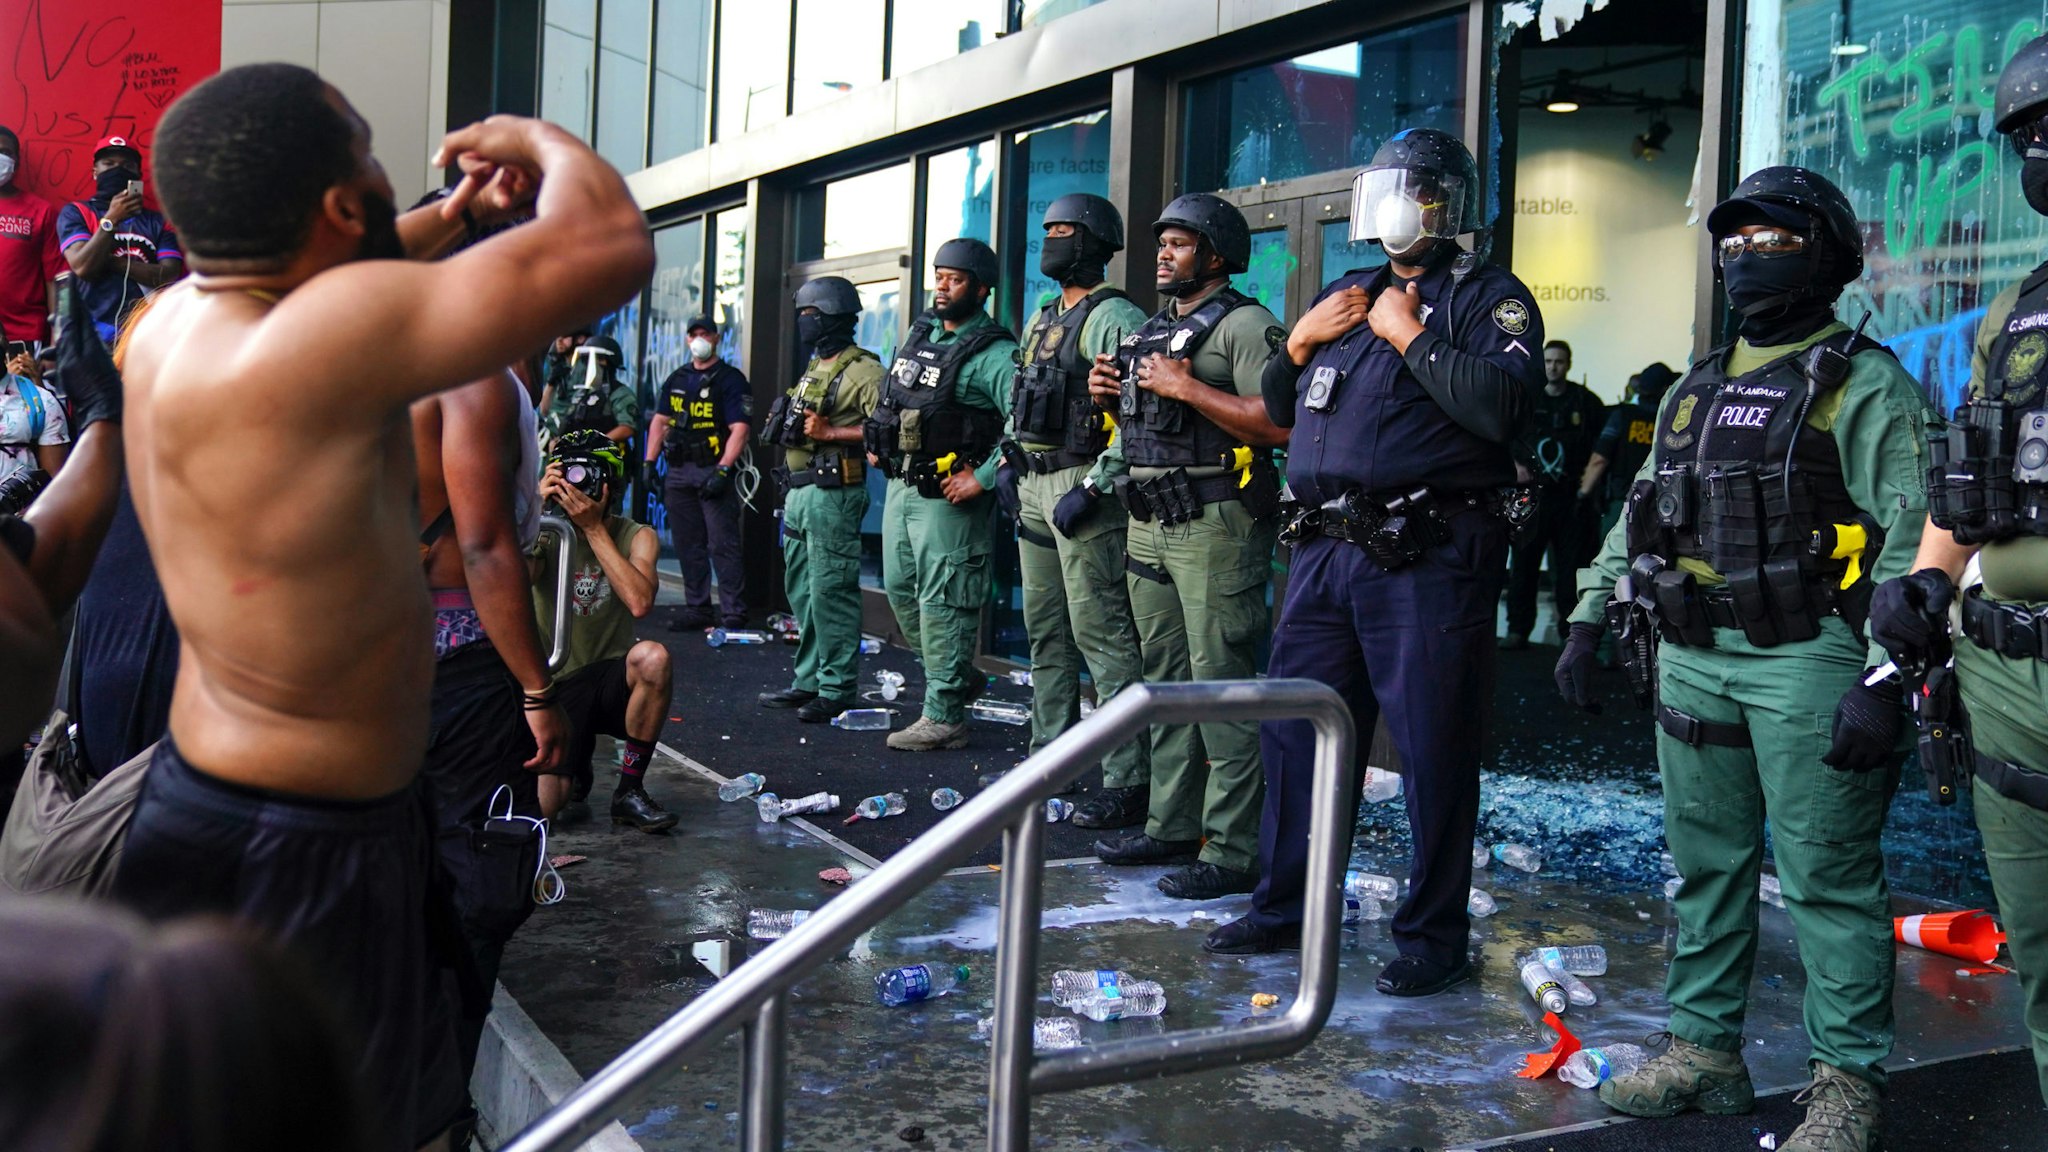 ATLANTA, GA - MAY 29: Police officers guard CNN Center during a protest on May 29, 2020 in Atlanta, Georgia. Demonstrations are being held across the U.S. after George Floyd died in police custody on May 25th in Minneapolis, Minnesota.